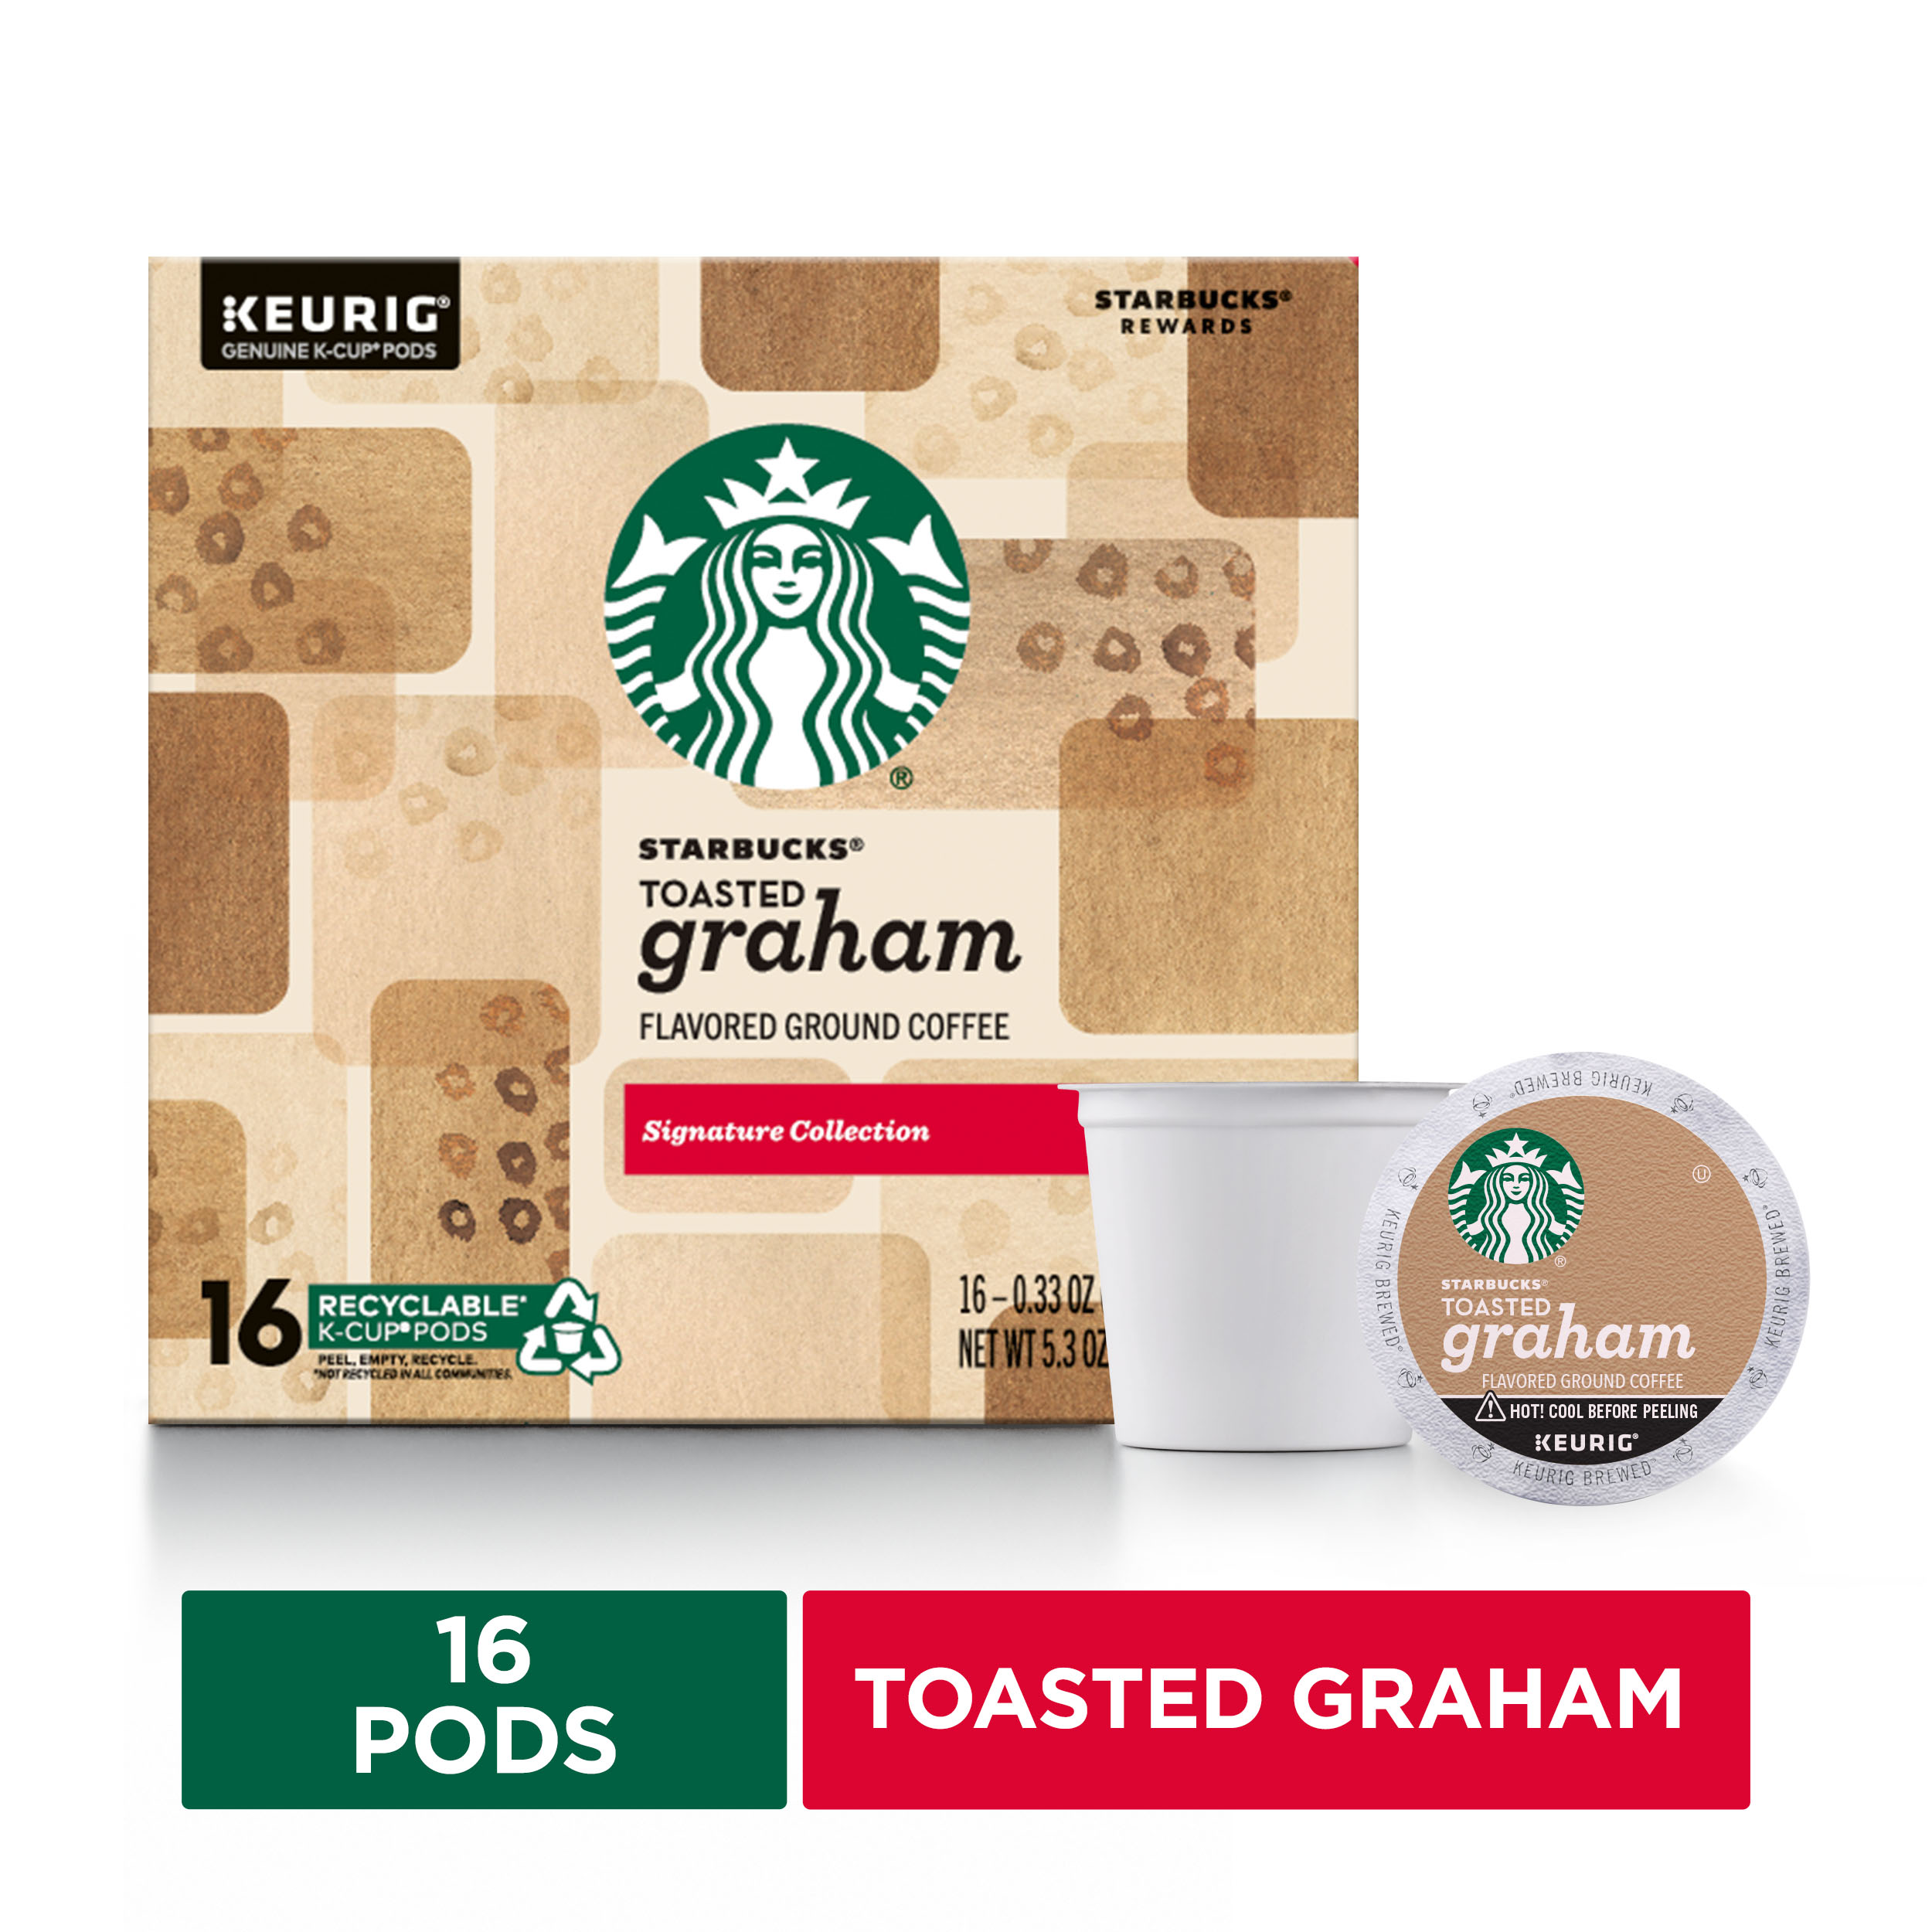 Starbucks Toasted Graham Keurig Coffee Pods, 16 Count Box - image 1 of 6